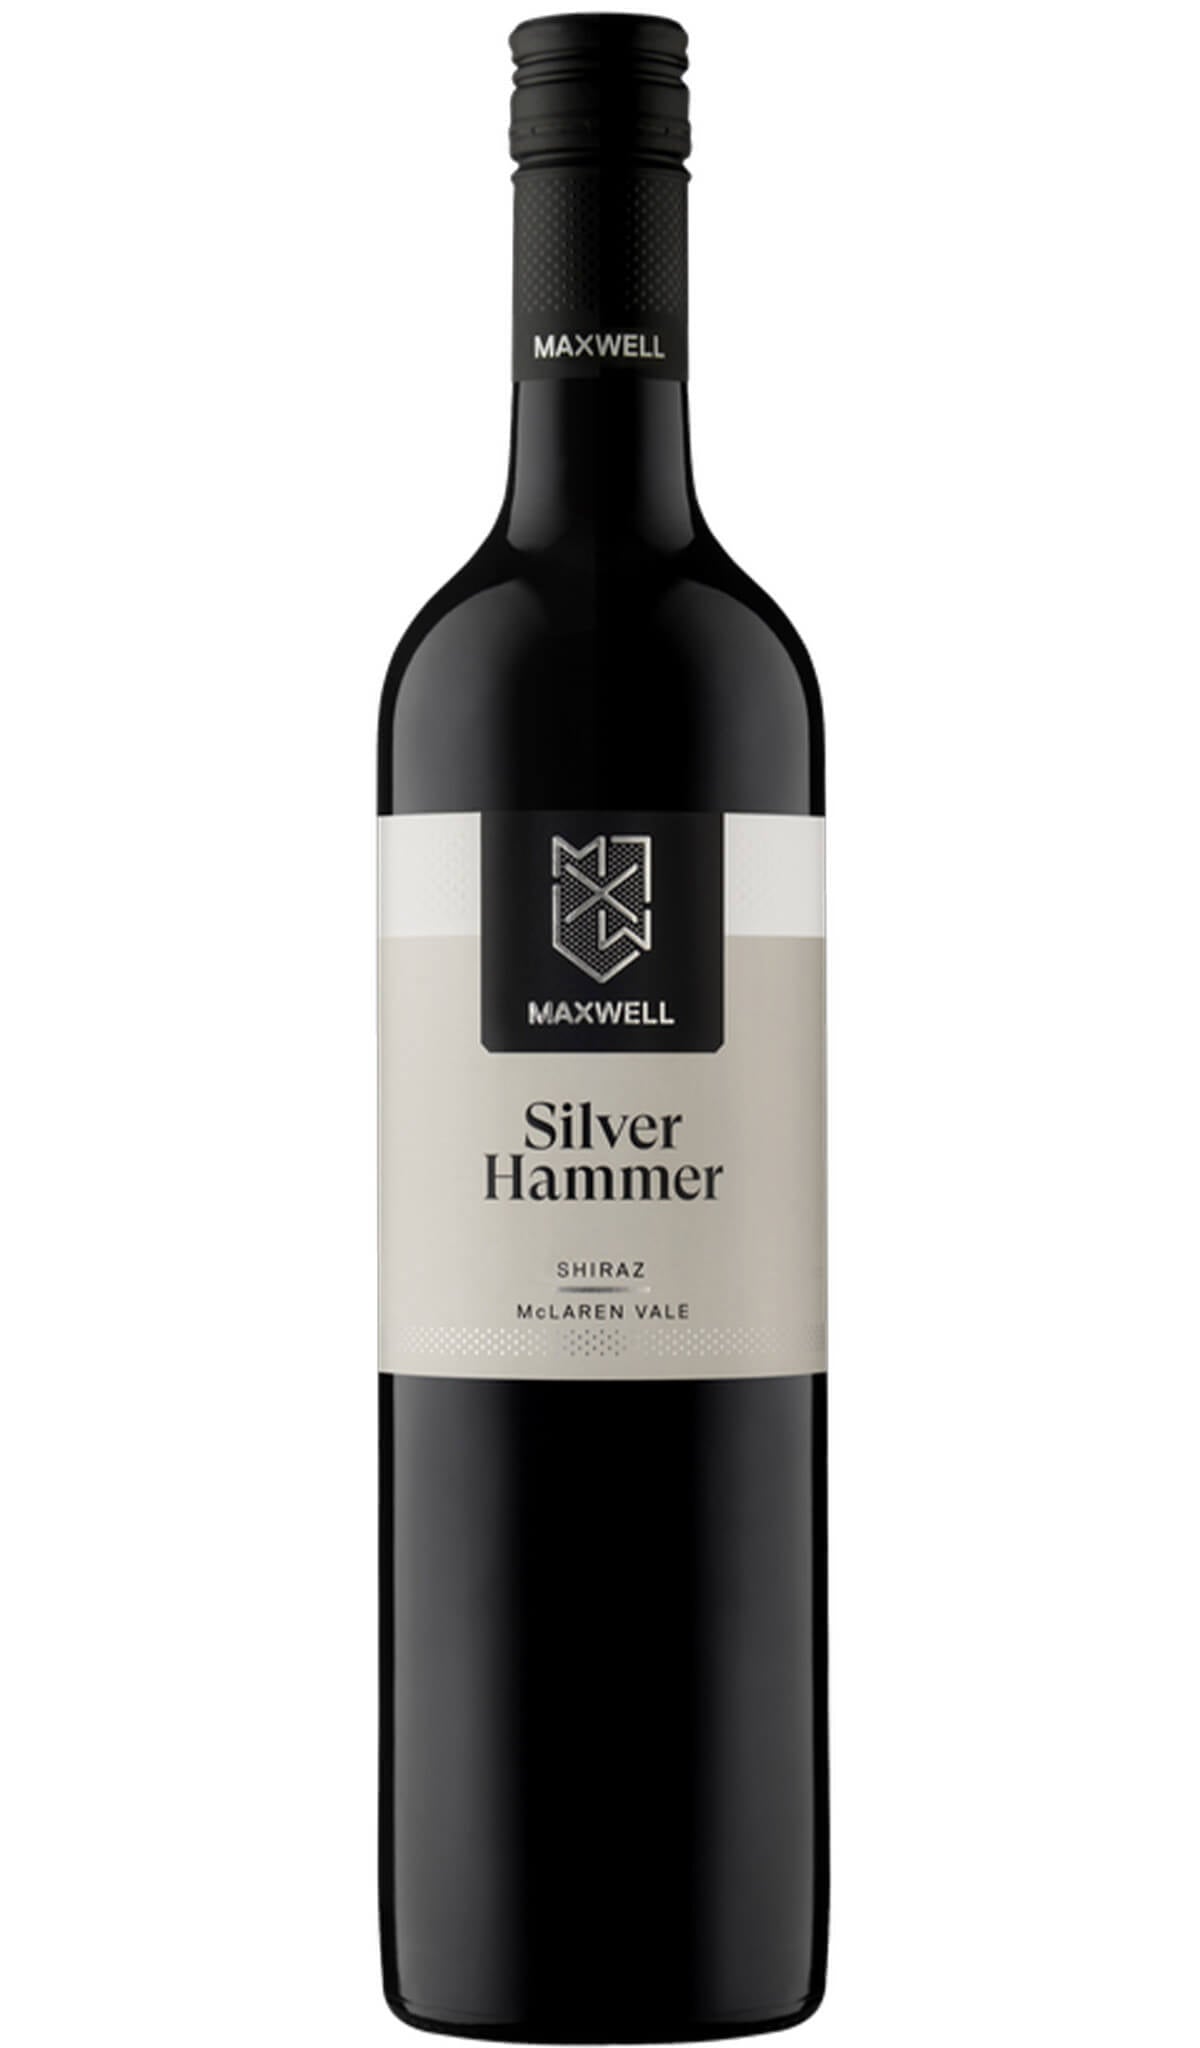 Find out more or buy Maxwell Silver Hammer Shiraz 2020 (McLaren Vale) online at Wine Sellers Direct - Australia’s independent liquor specialists.